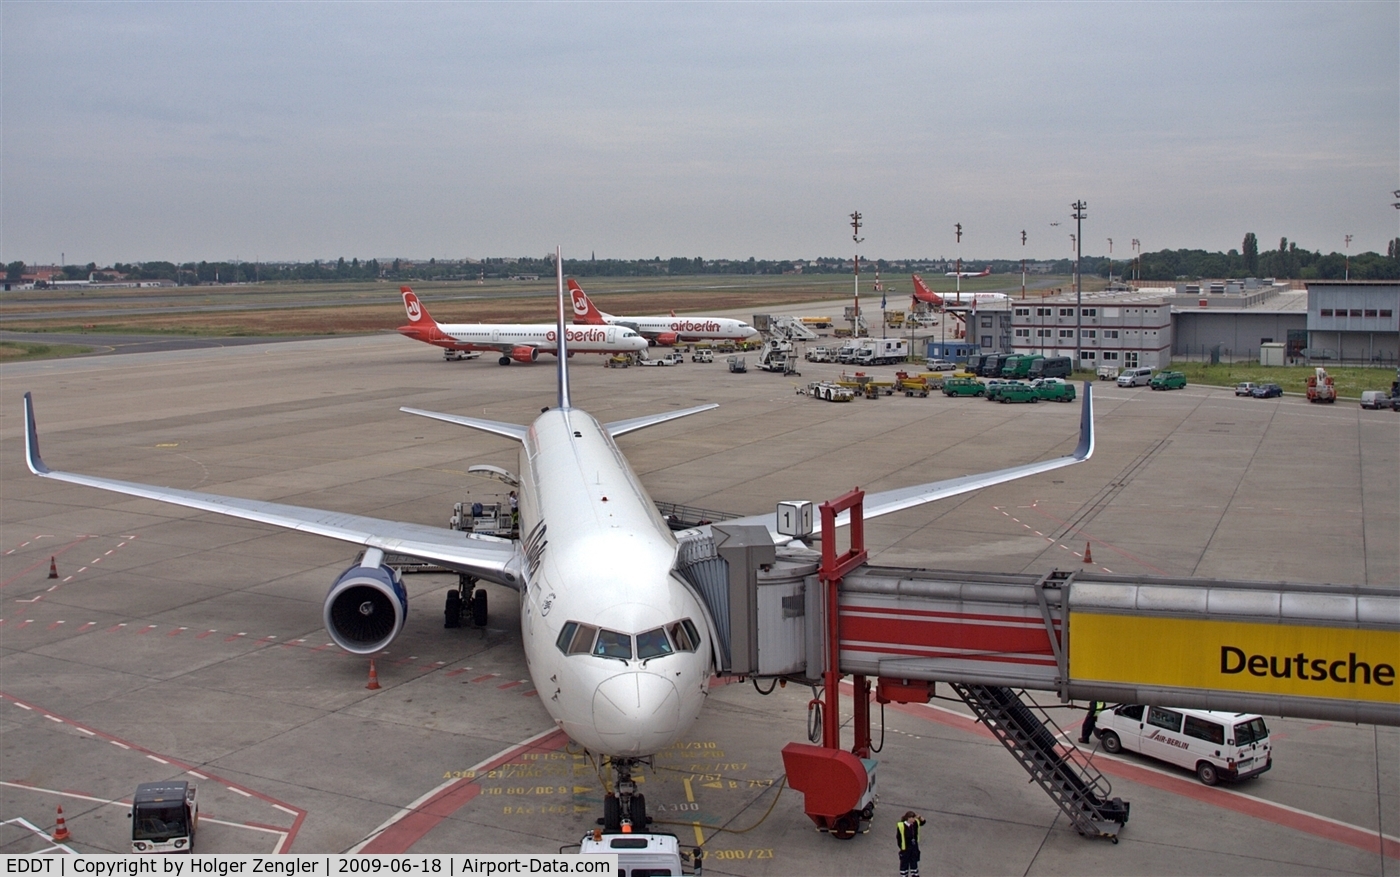 Tegel International Airport (closing in 2011), Berlin Germany (EDDT) - Apron overview at gate 1 ....